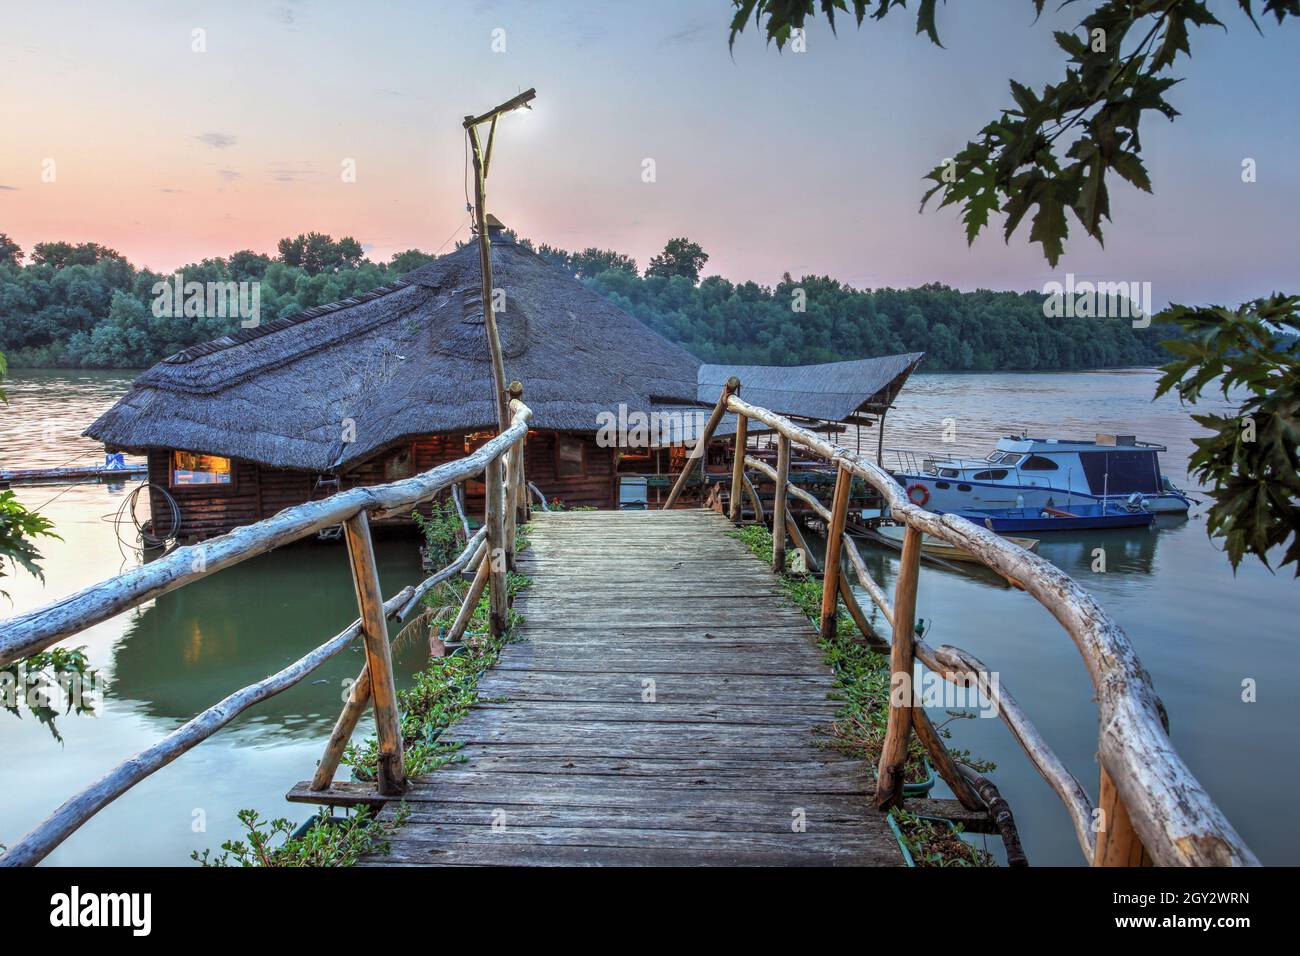 Beautiful summer sunset with the traditional rustic restaurant on silts Stara Koliba, on the Danube river in Belgrade, Serbia. Stock Photo